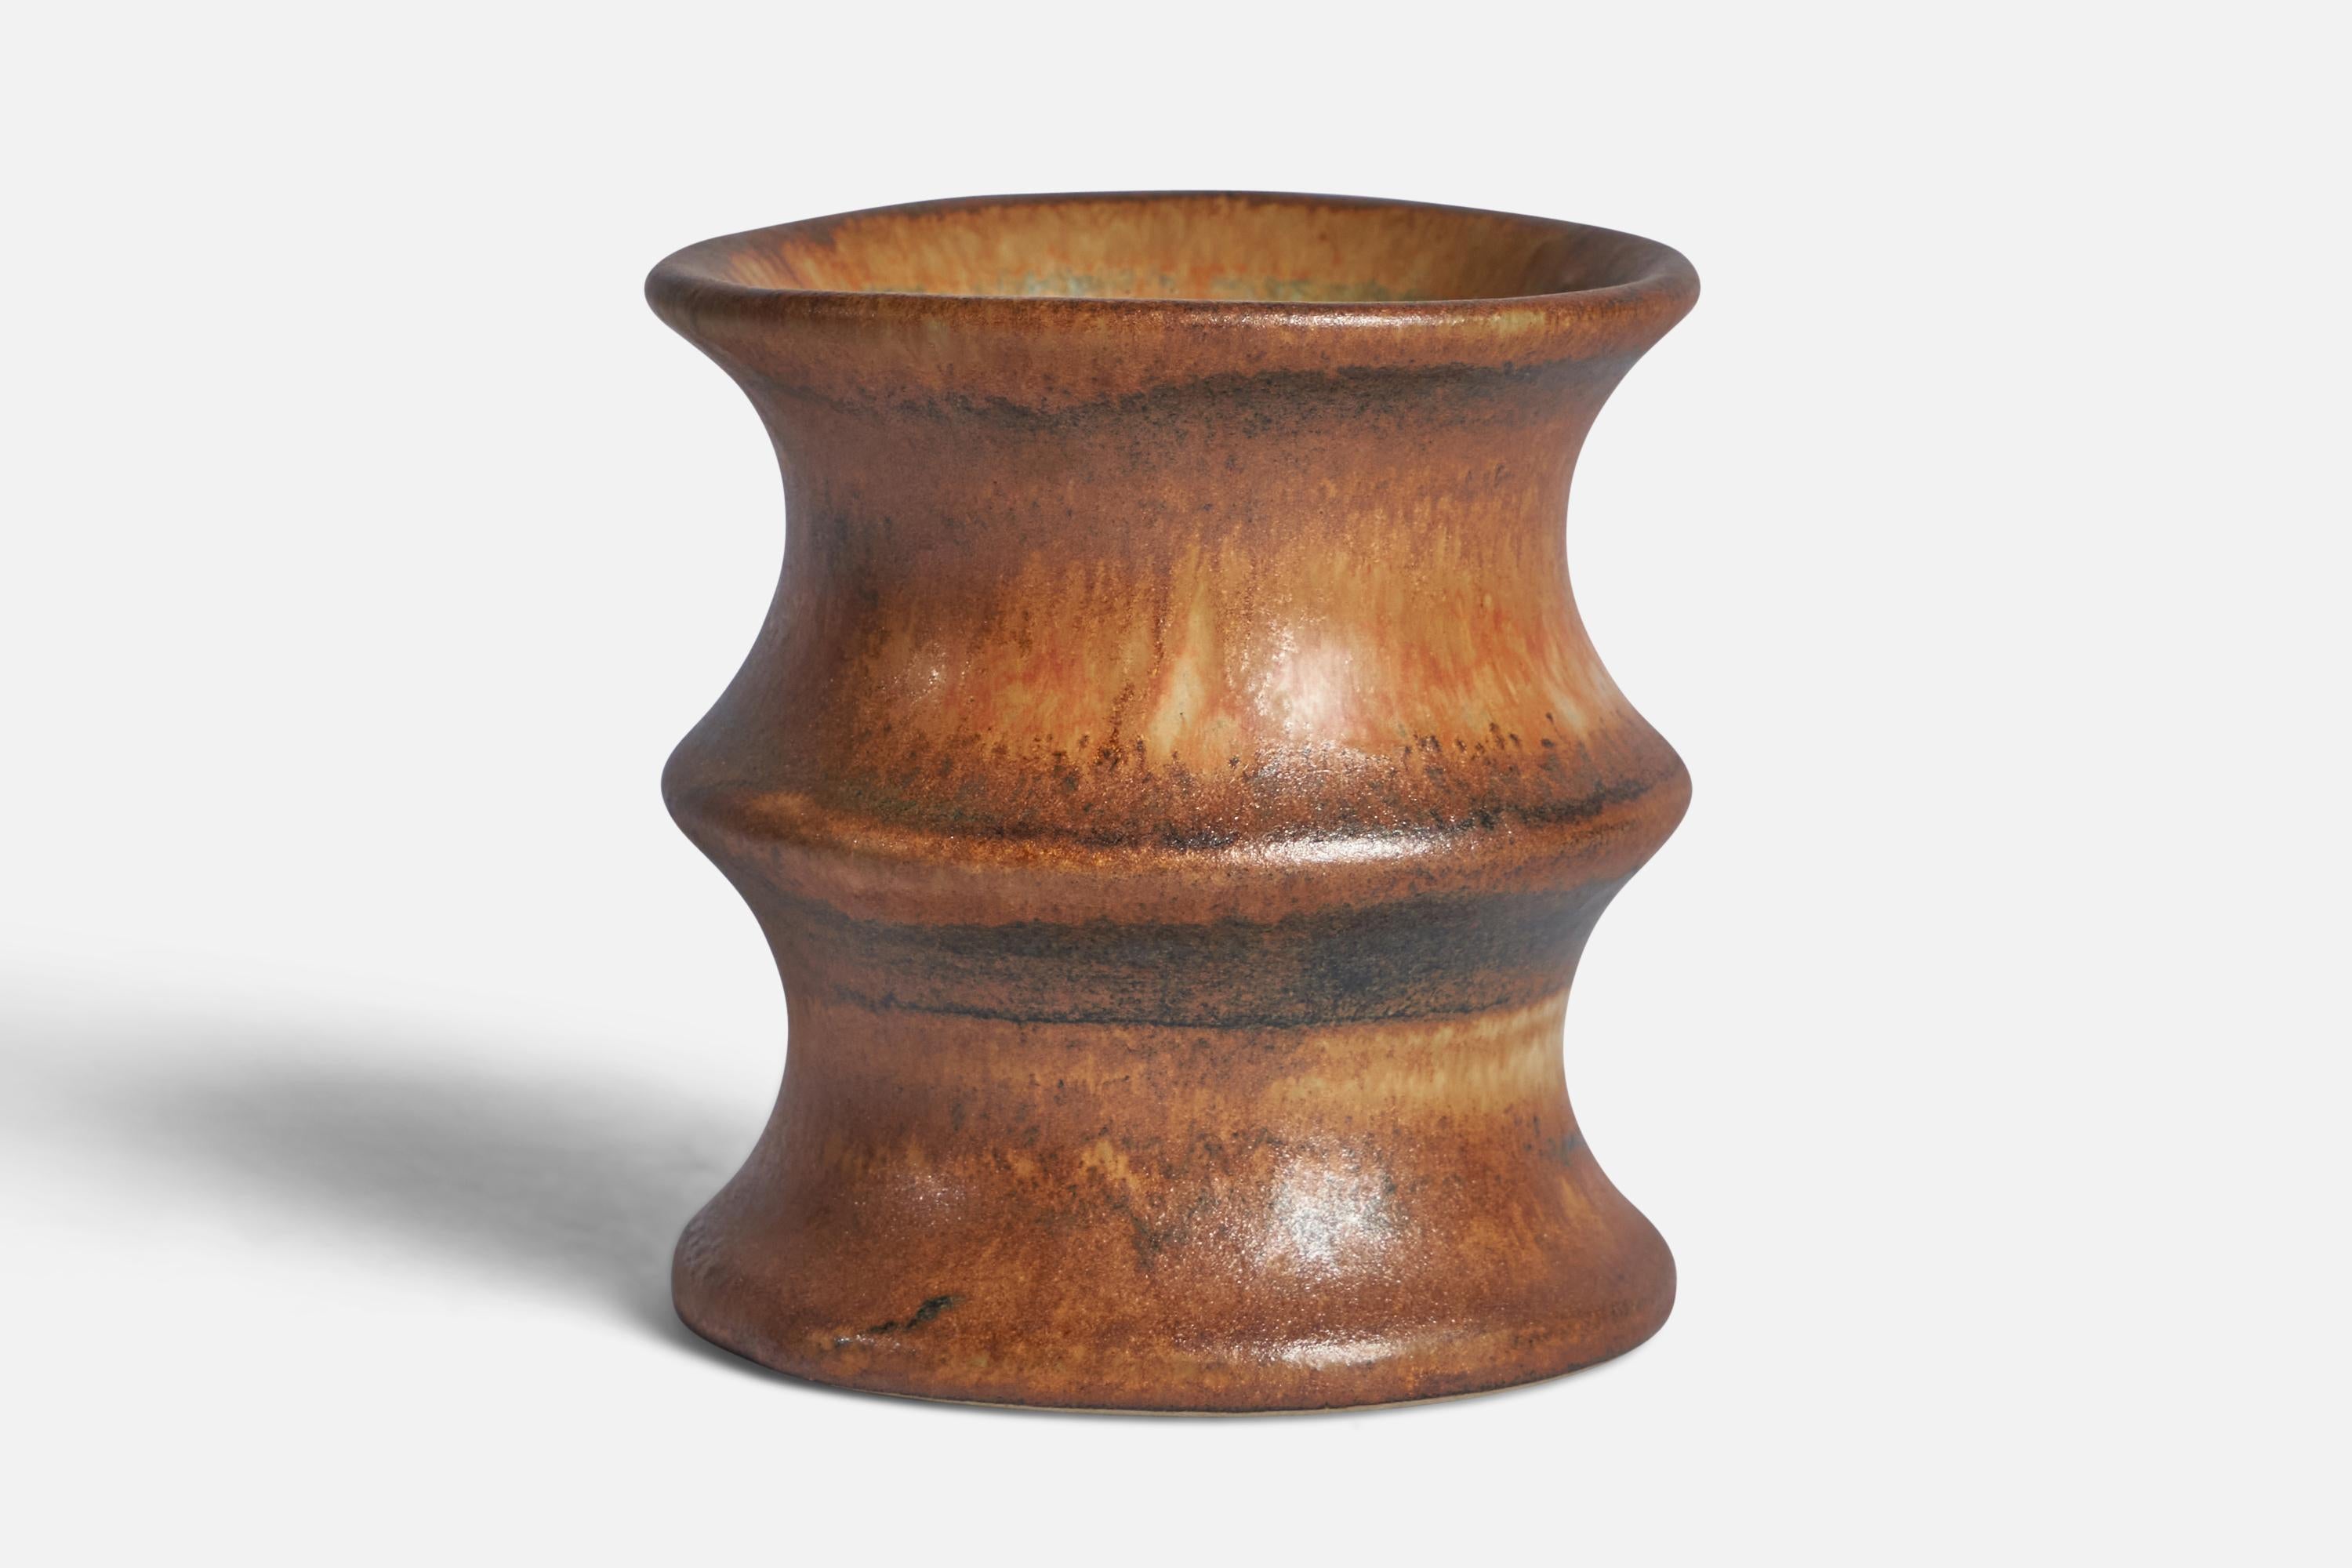 A small brown-glazed stoneware vase design by Bruno Karlsson and produced by Ego Stengods, Sweden, 1960s.